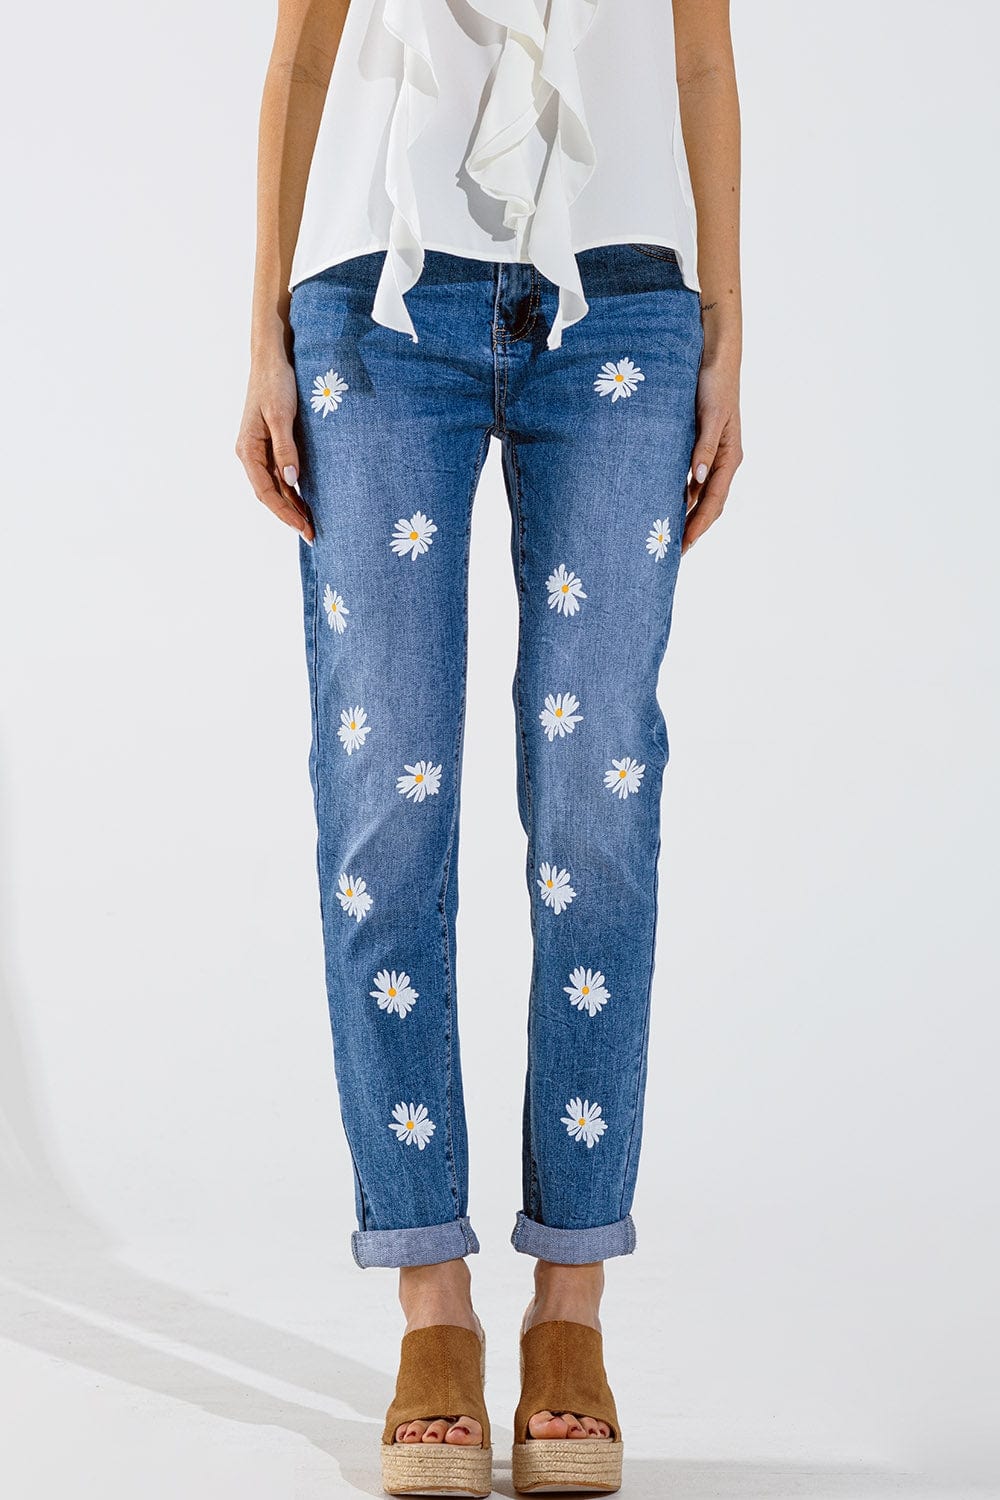 Q2 Women's Jean Skinny Jeans With Printed White Daisys In Mid Wash